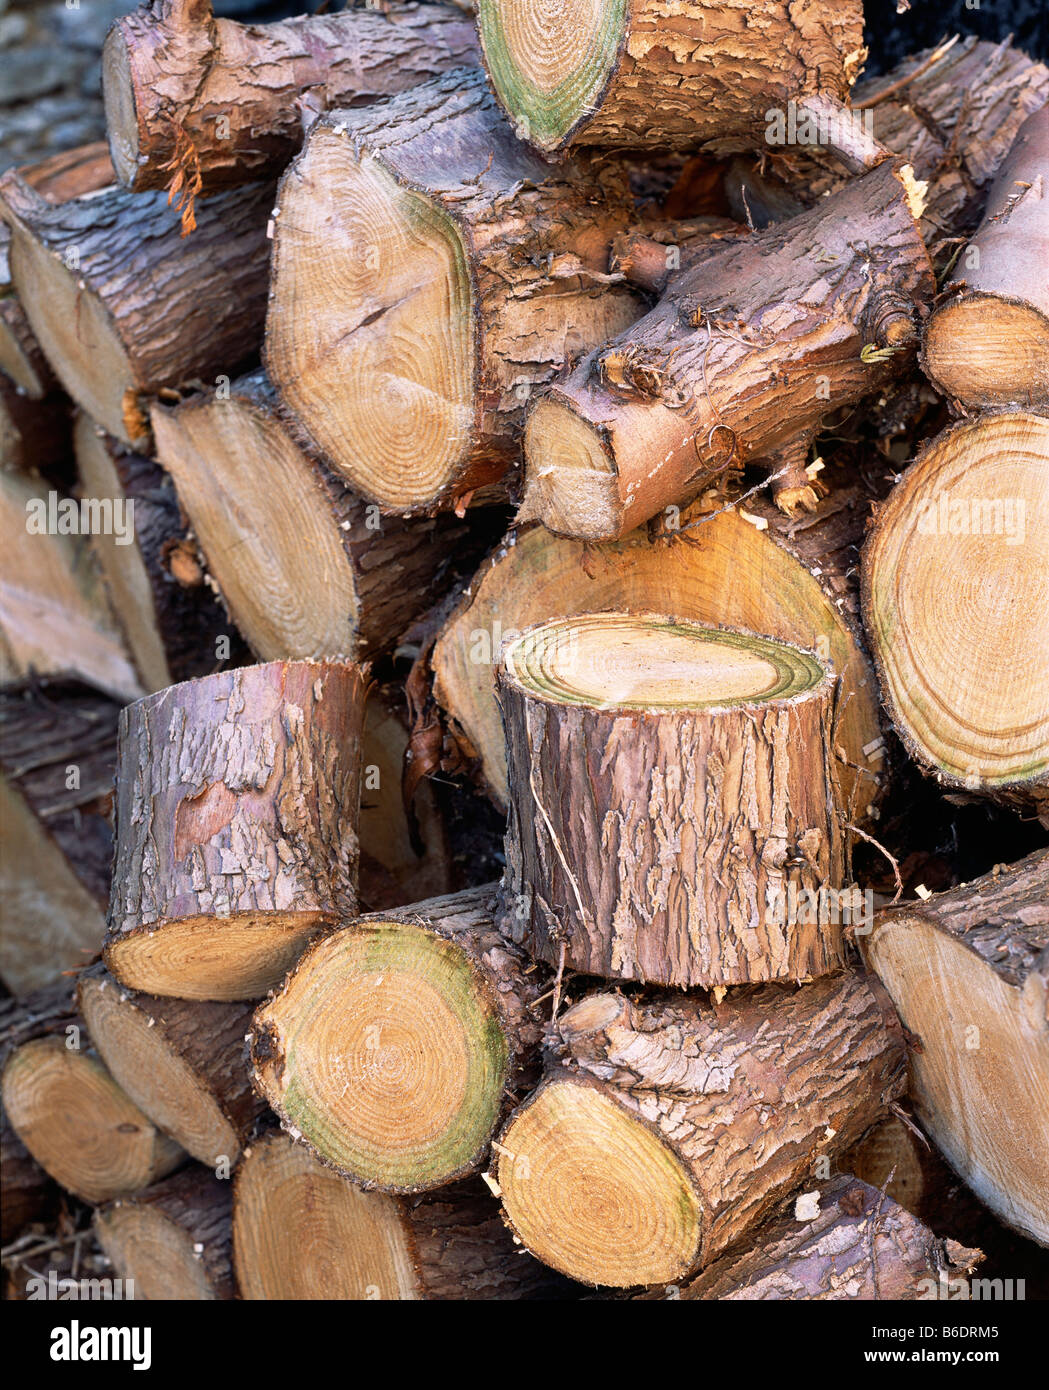 Wood pile of chopped logs for use as firewood. Stock Photo